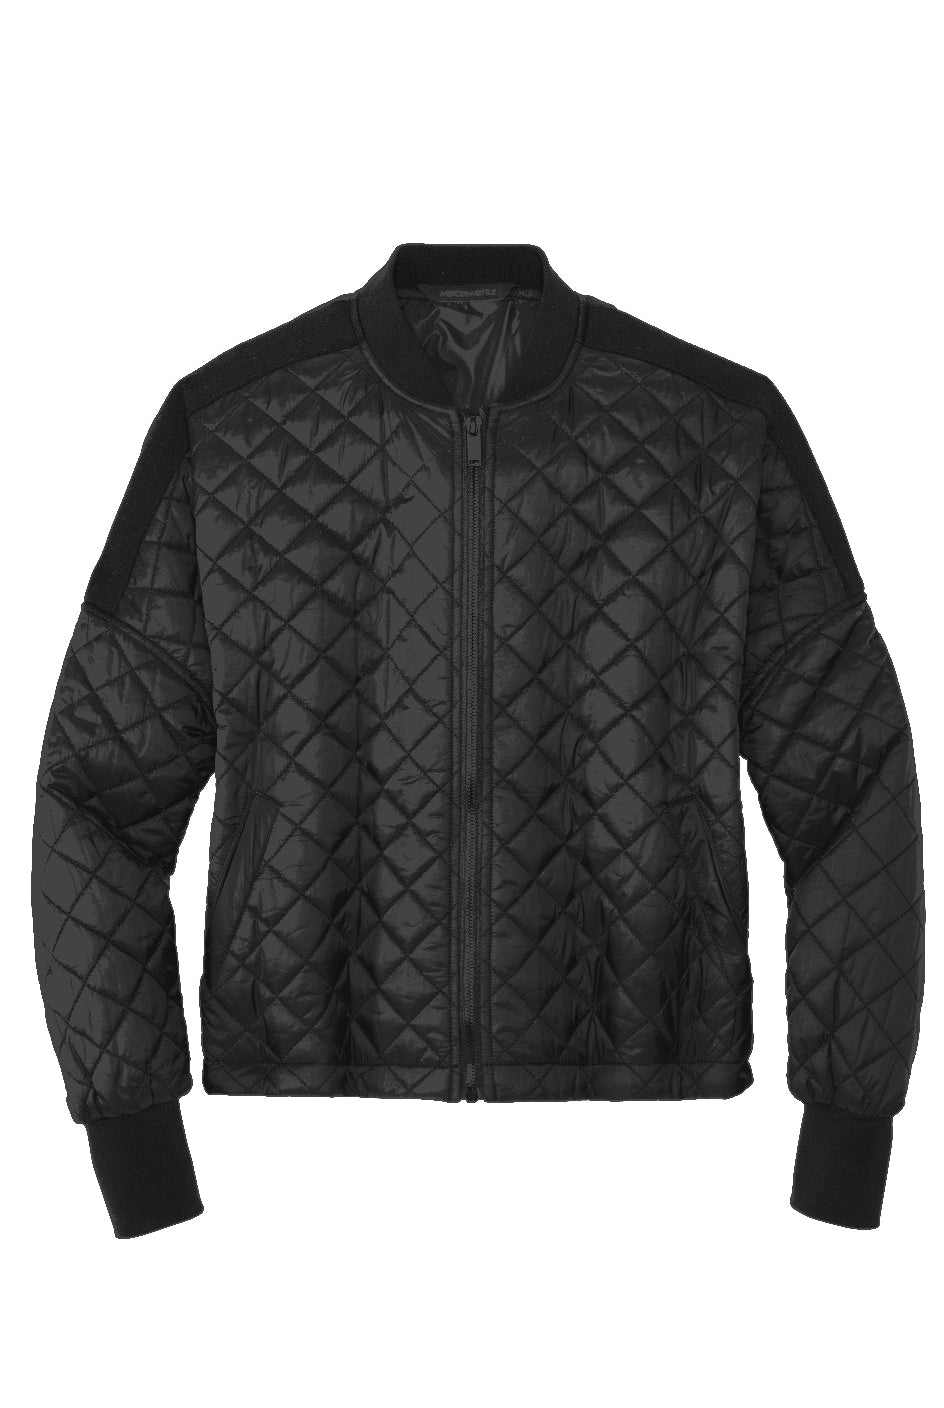 Dragon Foxx™ Women's Black Boxy Quilted Jacket - jackets - Apliiq - Dragon Foxx™ Womens Black Boxy Quilted Jacket - APQ-4487387S5A0 - xs - Deep Black - Black Boxy Quilted Jacket - Boxy Quilted Jacket - Dragon Foxx™